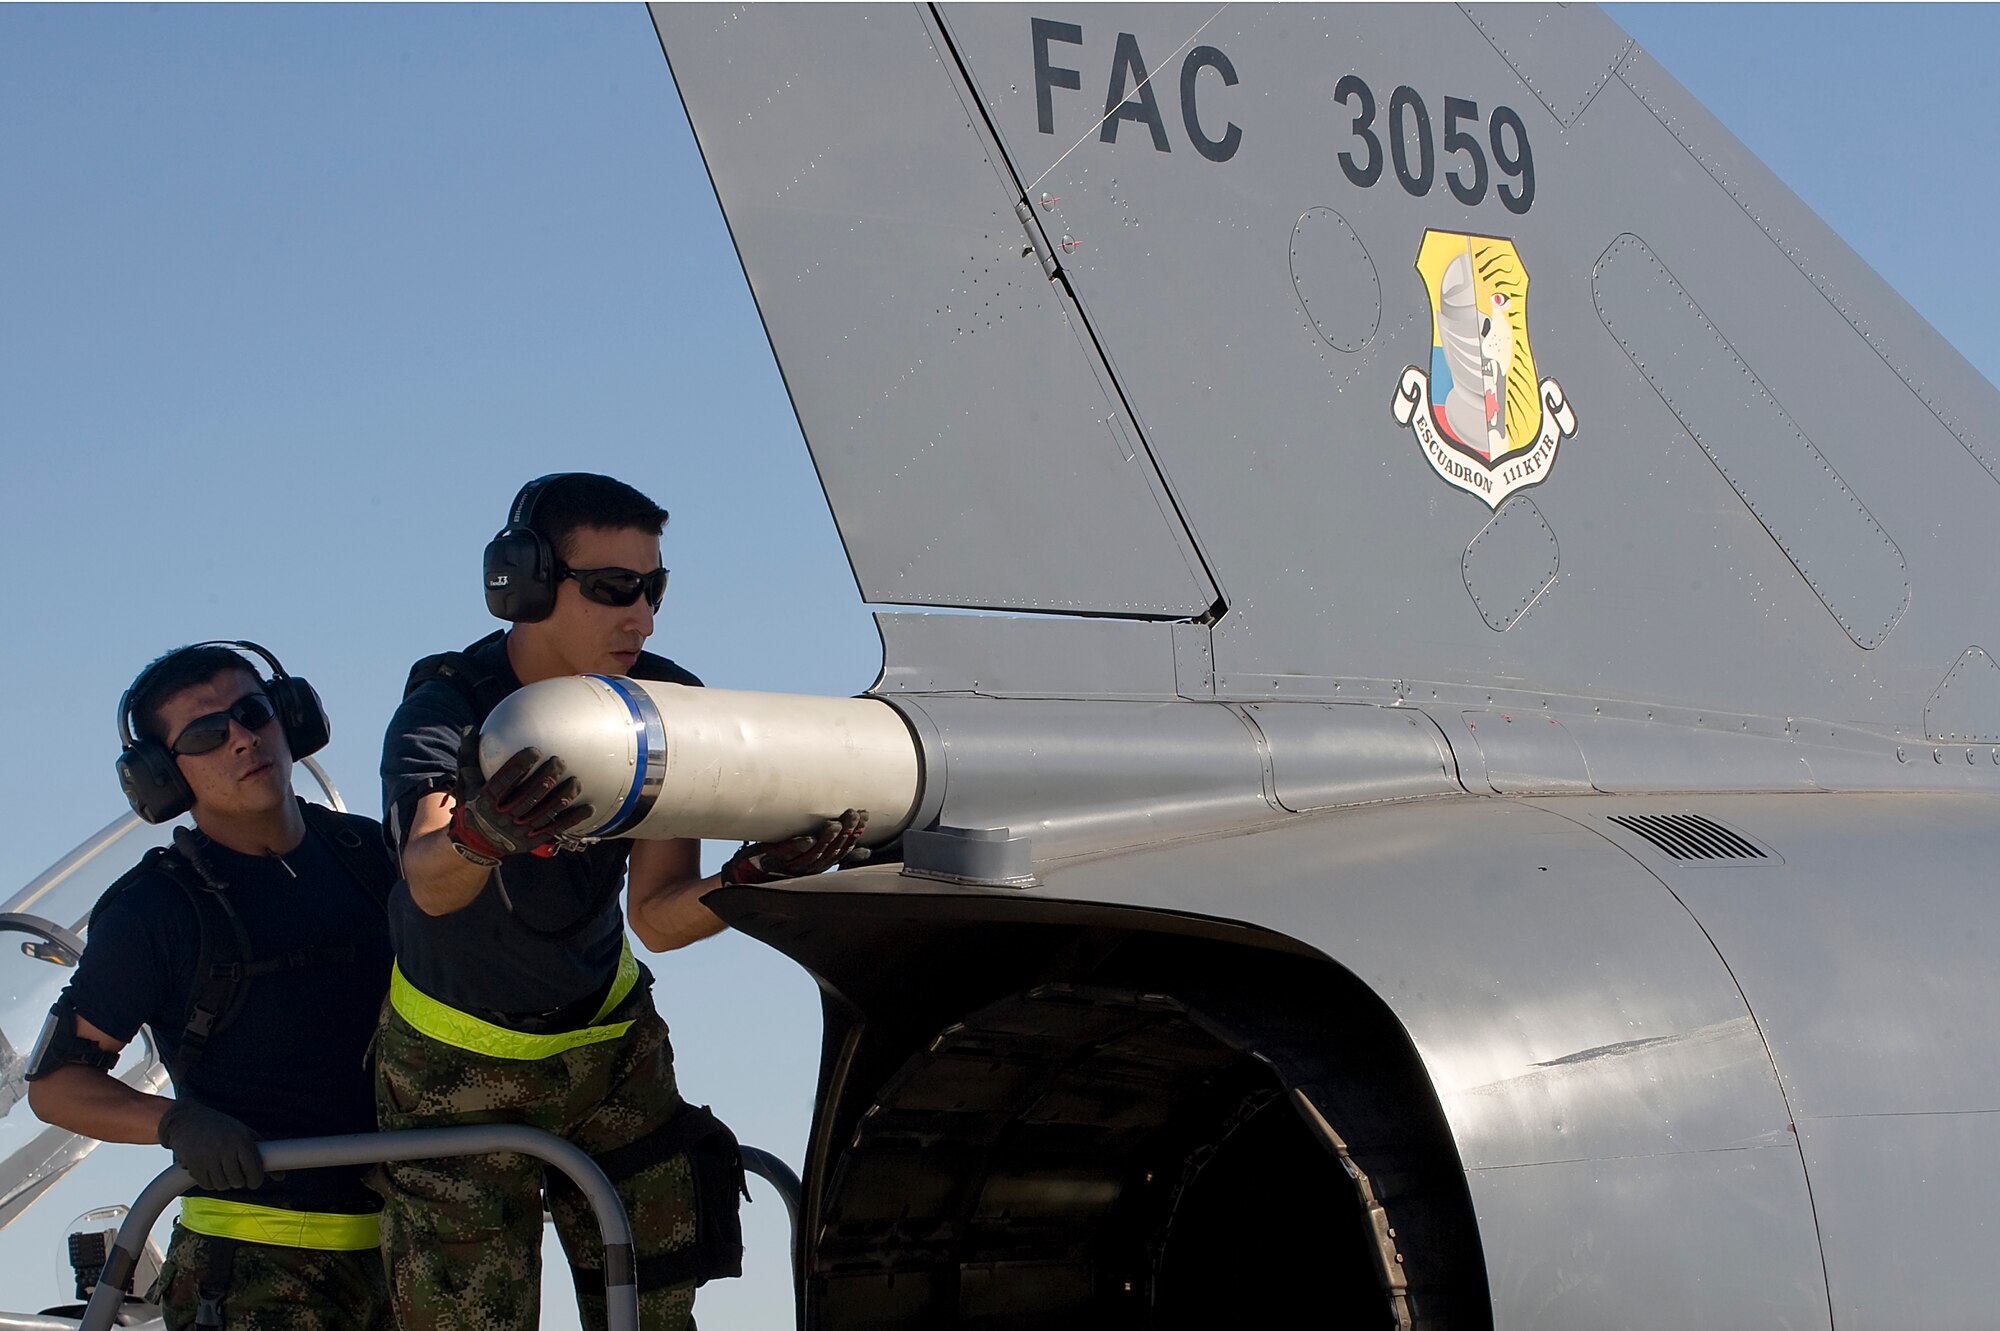 Colombian air force Junior Technicians Jhonatan Galvez and Jesus Ovalle install a  drag chute for a Kfir fighter jet during Red Flag 12-4 July 17, 2012, at Nellis Air Force Base, Nev. Red Flag is a realistic combat training exercise involving the air forces of the United States and its allies. (U.S. Air Force photo by Airman 1st Class Matthew Lancaster)